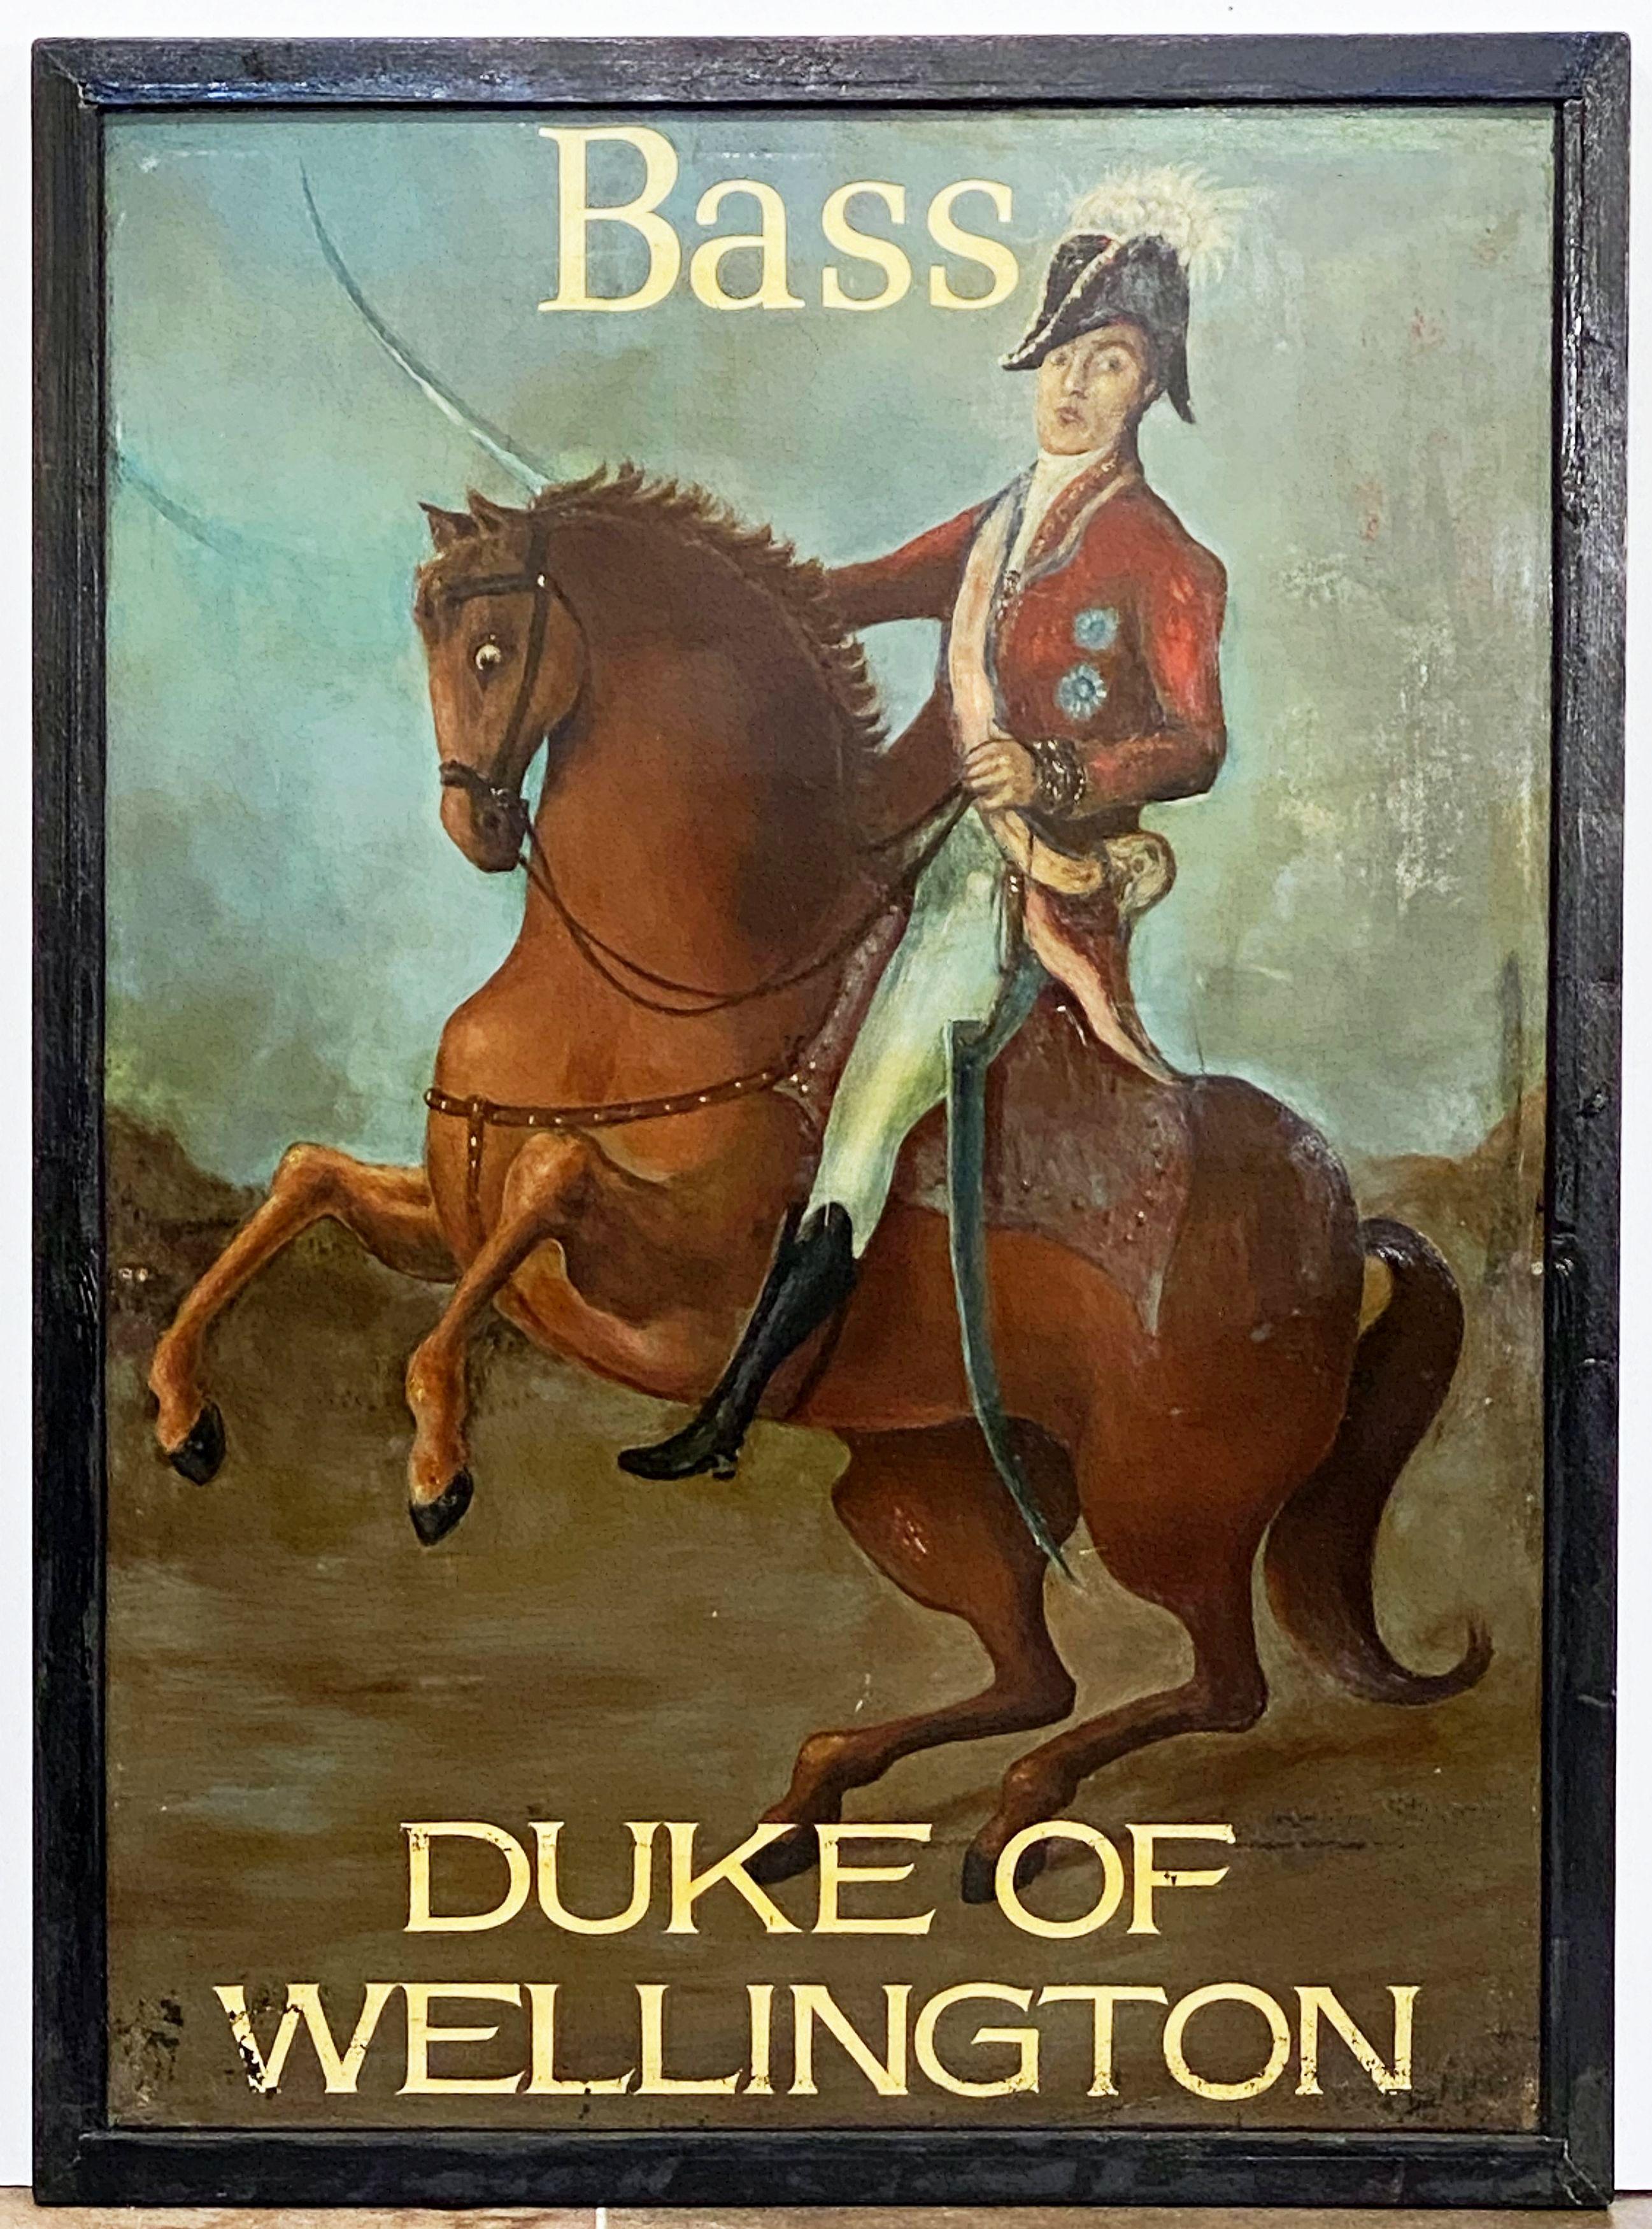 An authentic English pub sign (one-sided) featuring a painting of the famous Napoleonic-era British military hero with his sword drawn, upon a horse, entitled: Duke of Wellington and Bass (for Bass Brewery, the original pub license